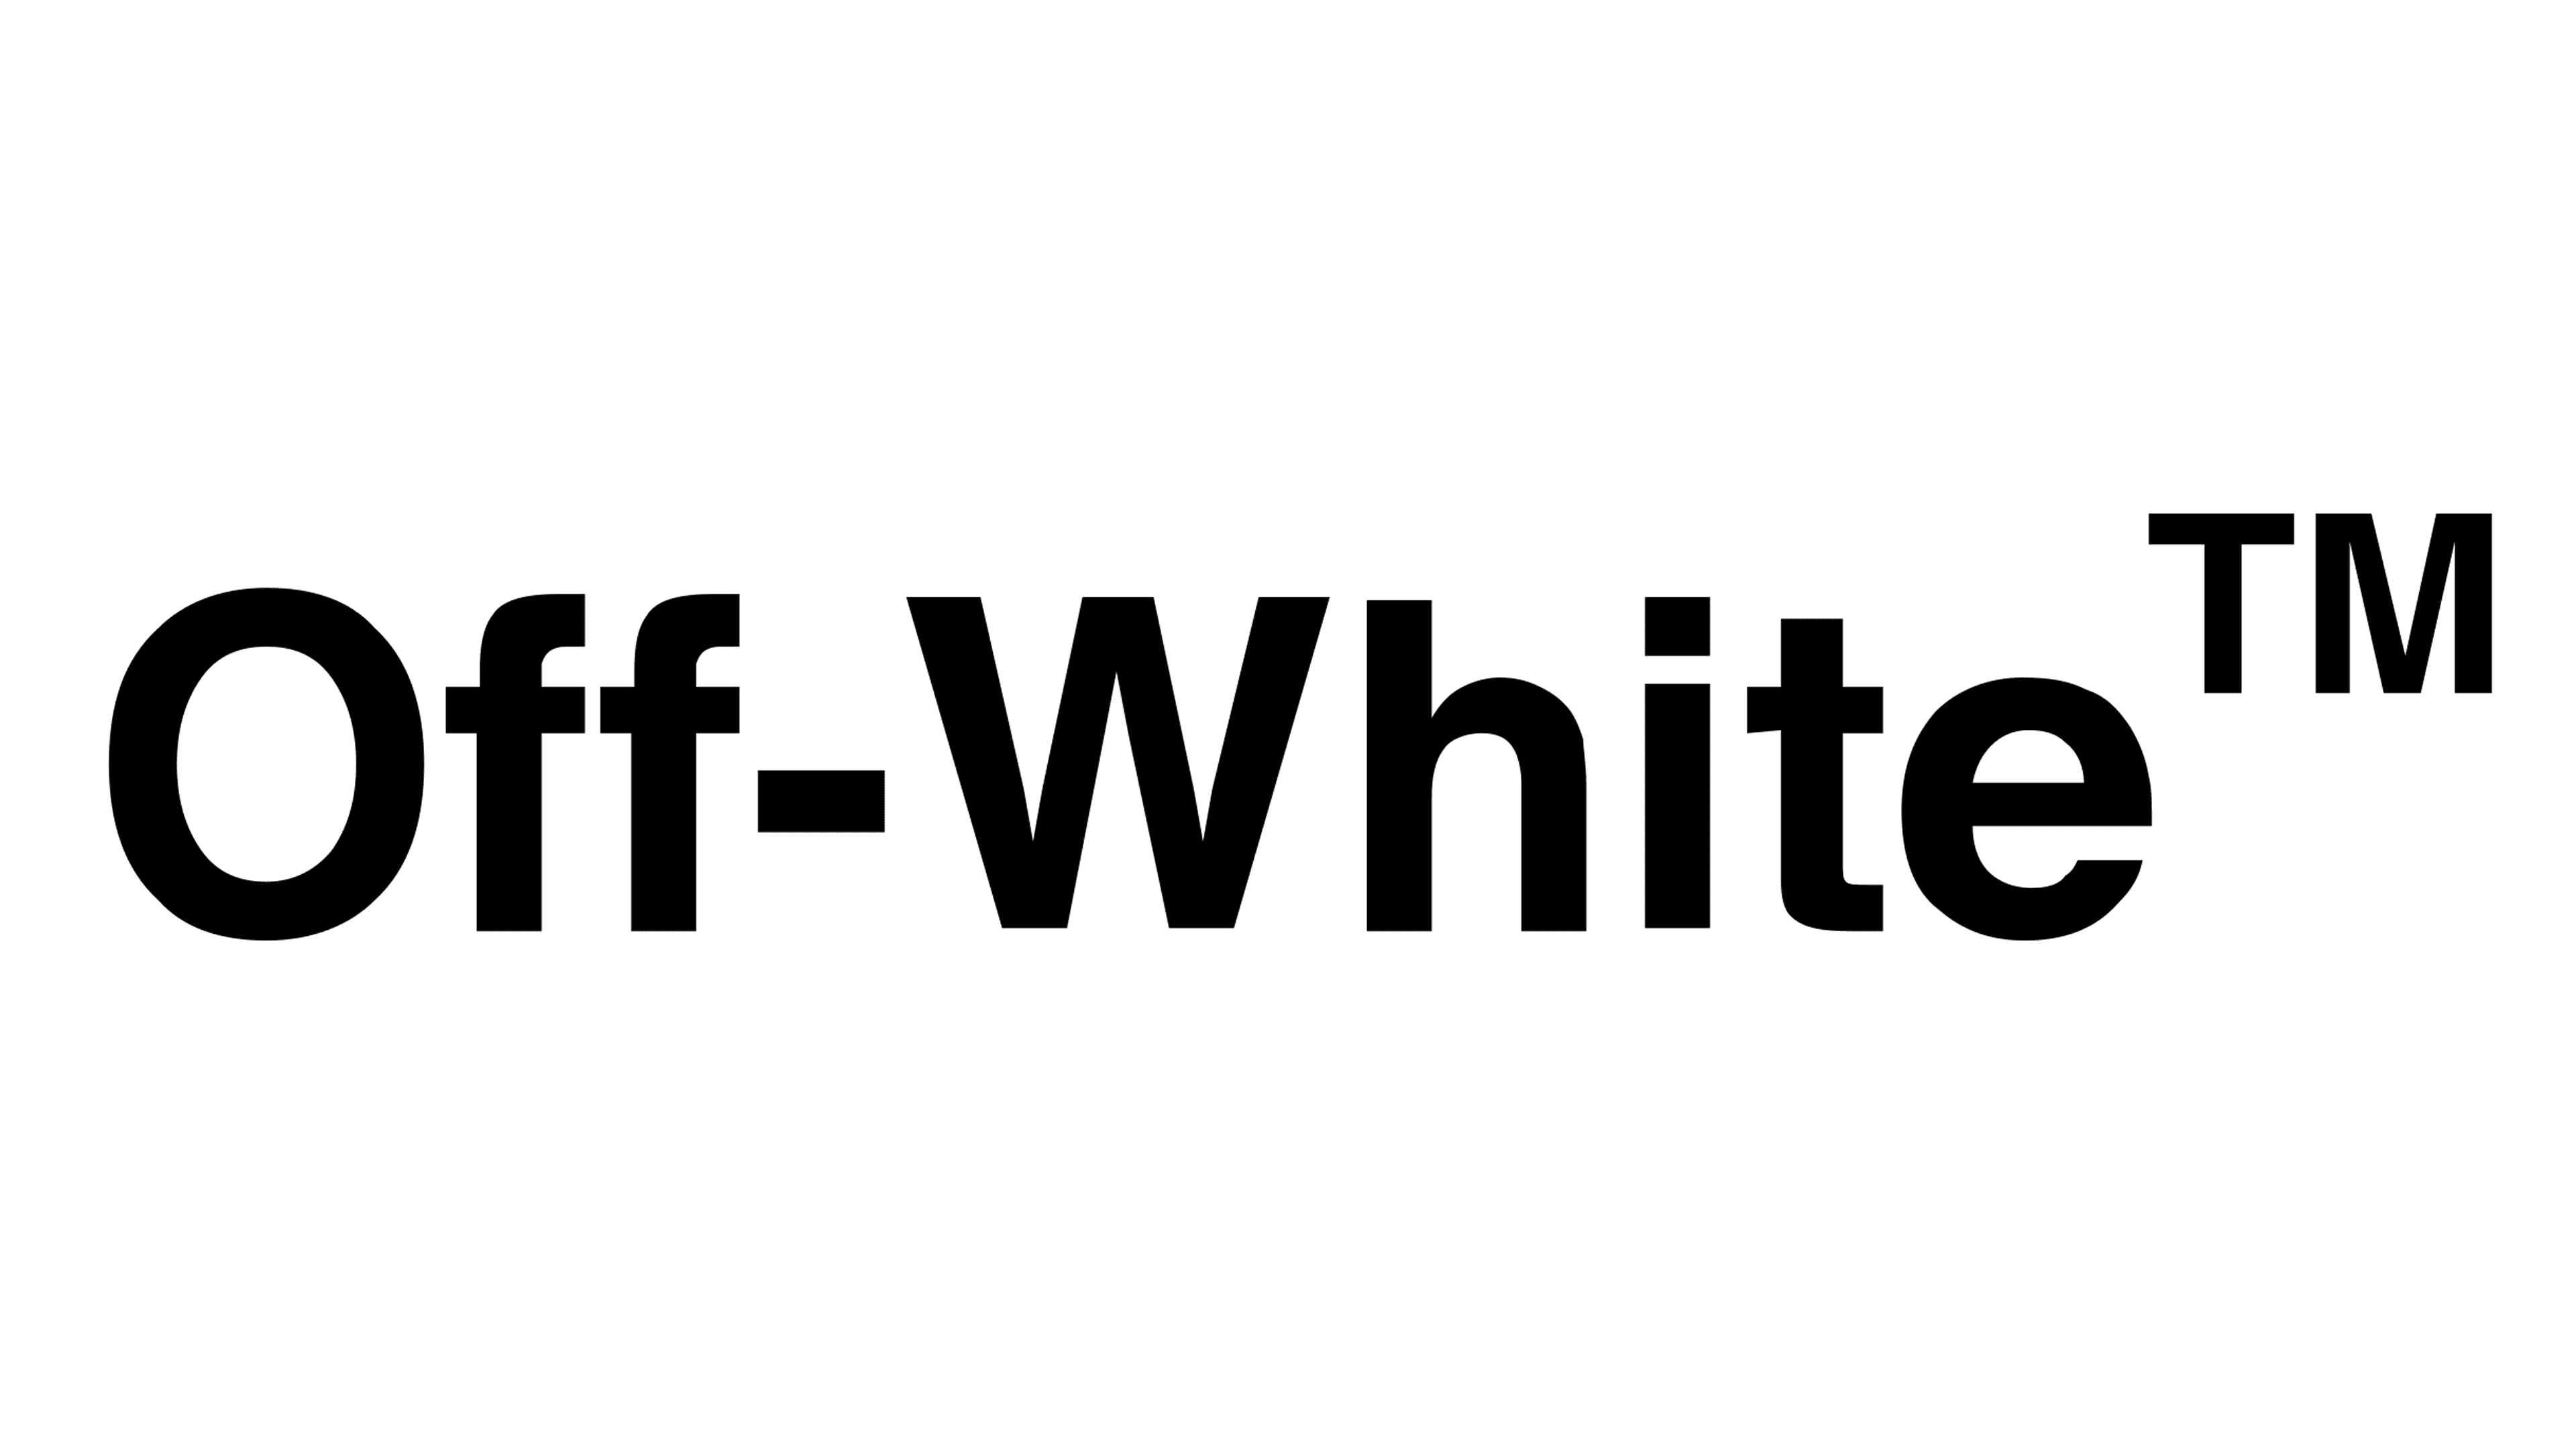 Find hd Off White Logo Png, Transparent Png. To search and download more  free transparent png images.